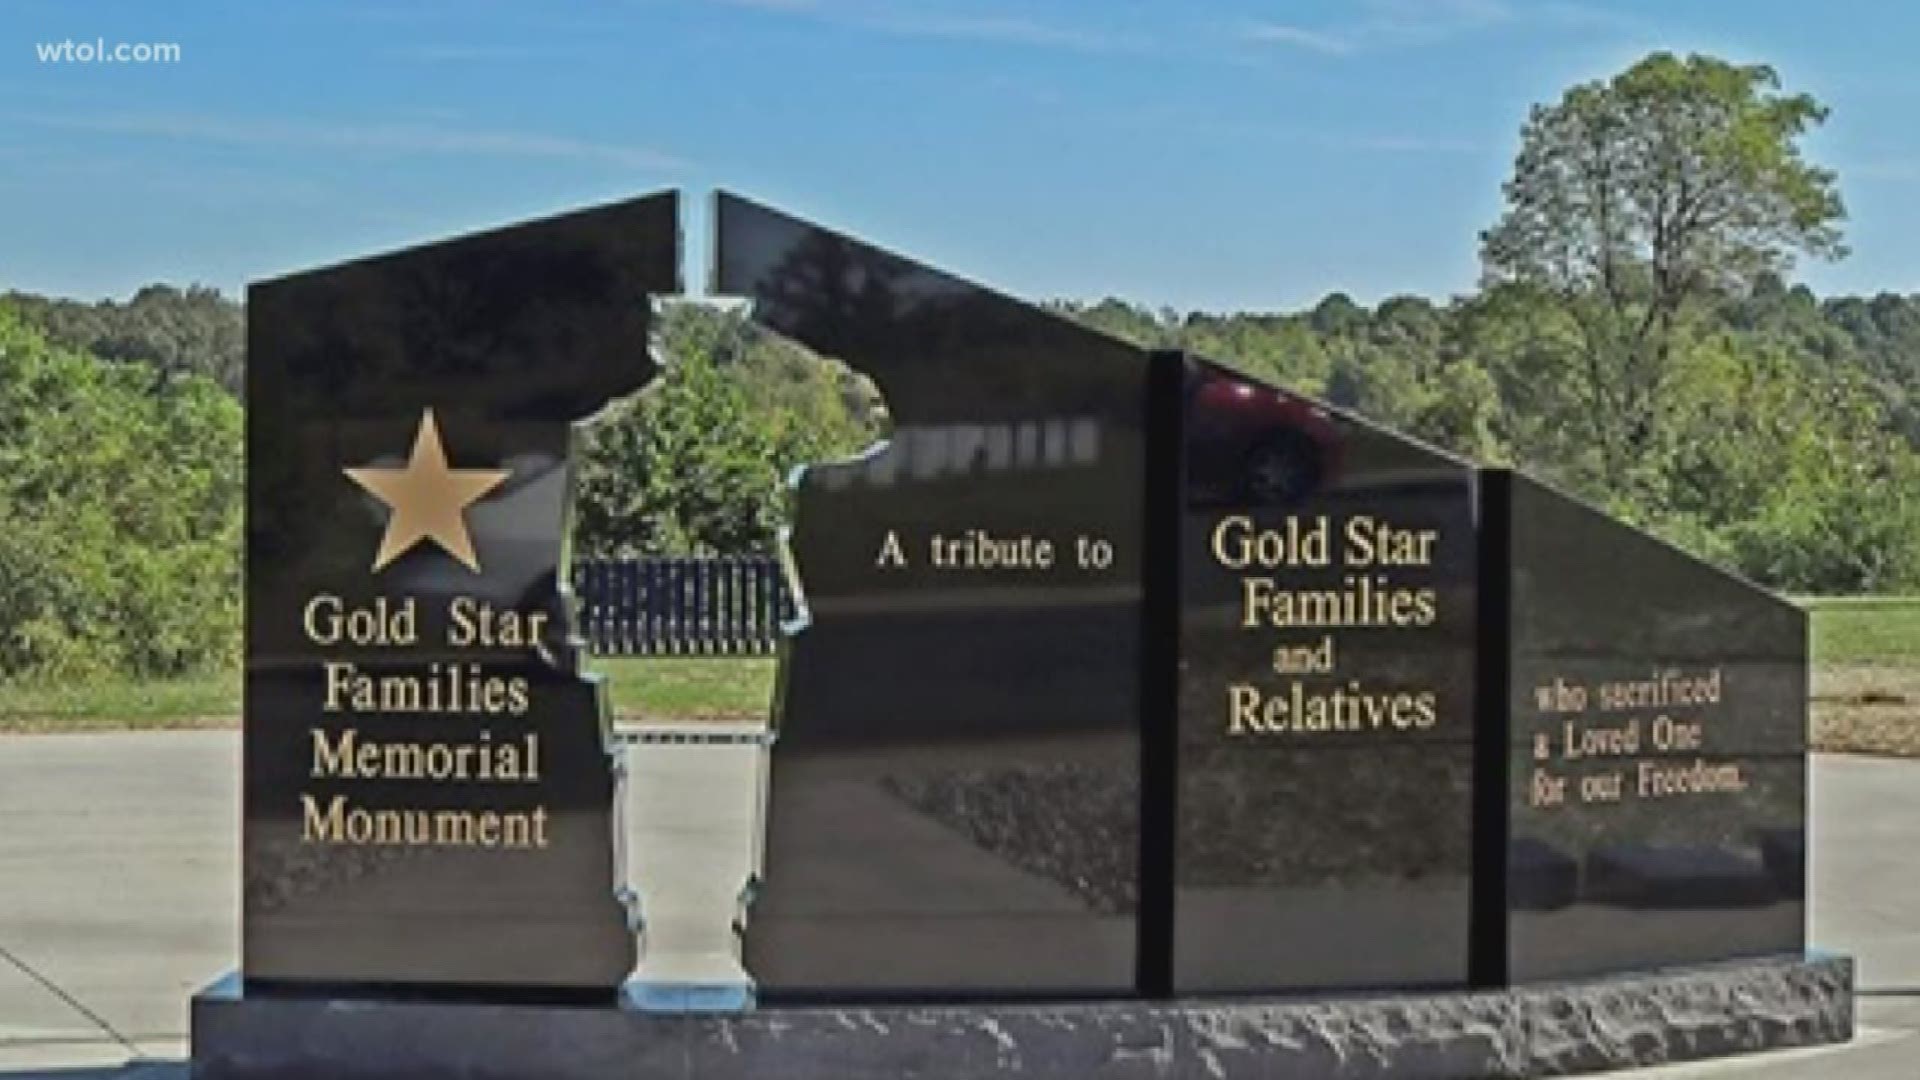 The black granite memorial is planned for Riverside Park and will feature a walkway with pavers that can be dedicated to fallen heroes and veterans.